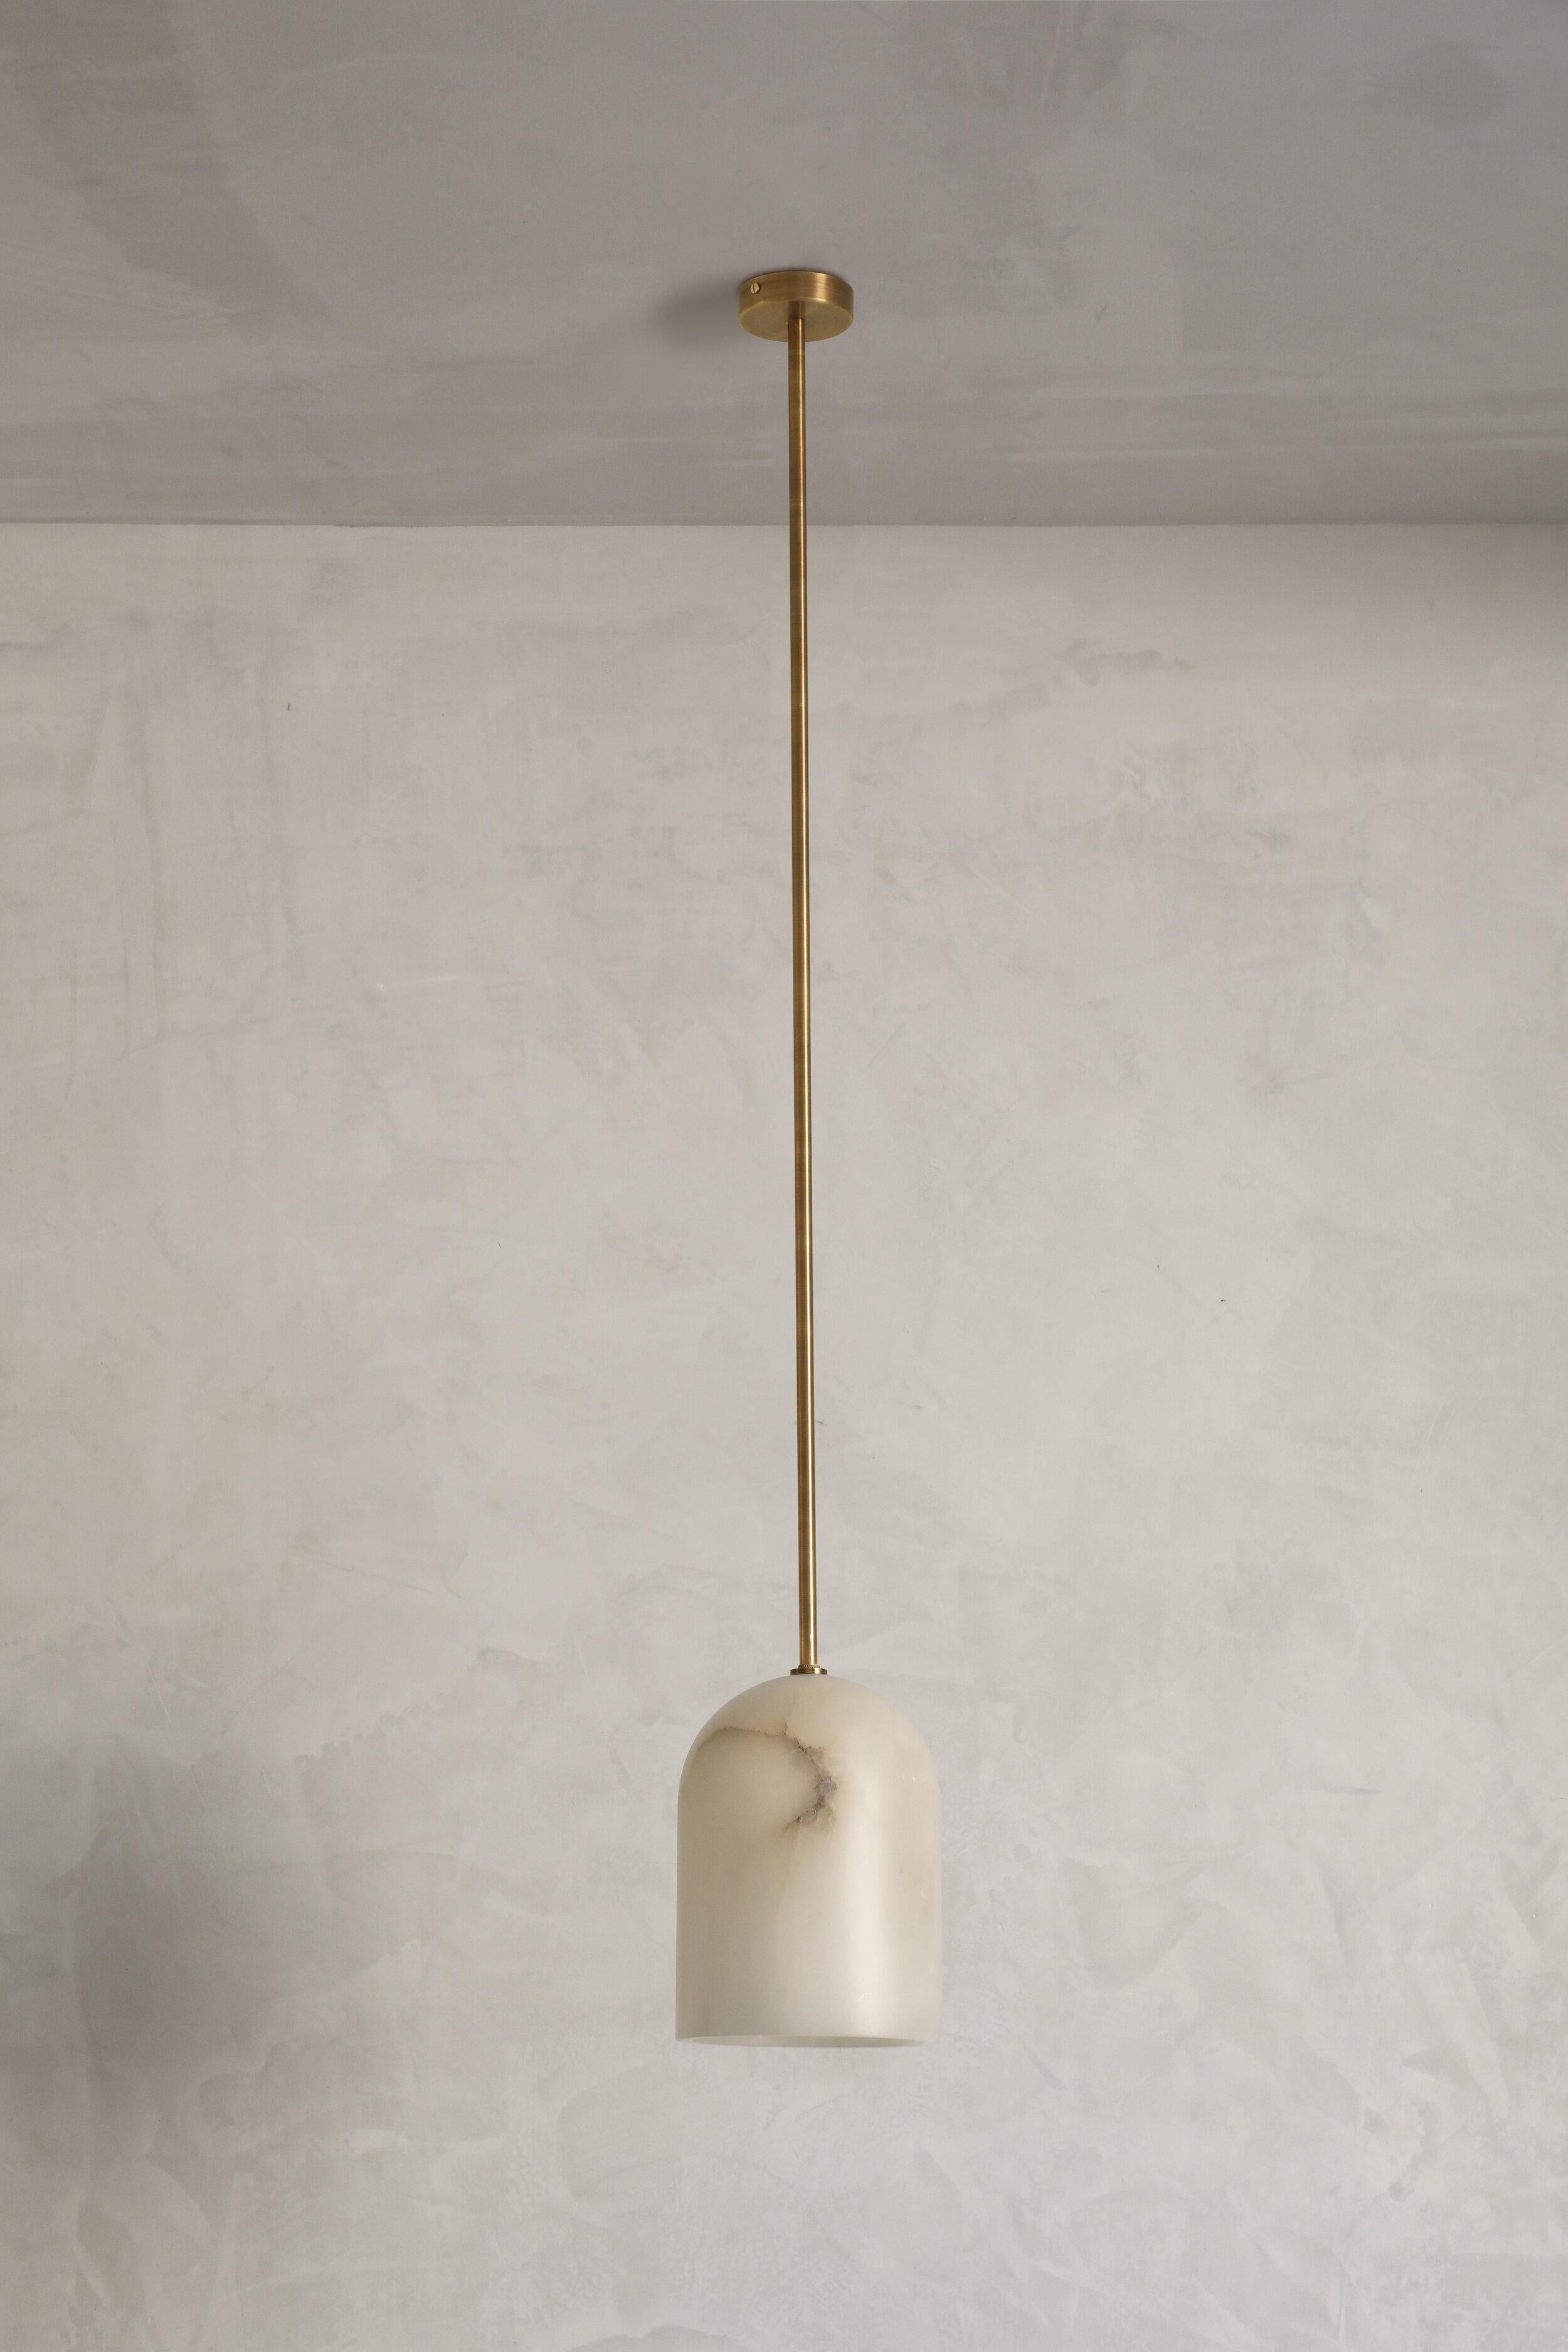 Belfry Alabaster tube 16 pendant by Contain
Dimensions: Ø 16 x H 22 cm.
Materials: brass structure and alabaster stone.

Also available in different finishes and dimensions: Ø16 cm / Ø22 cm / Ø28 cm x custom length. Please contact us.

Socket: